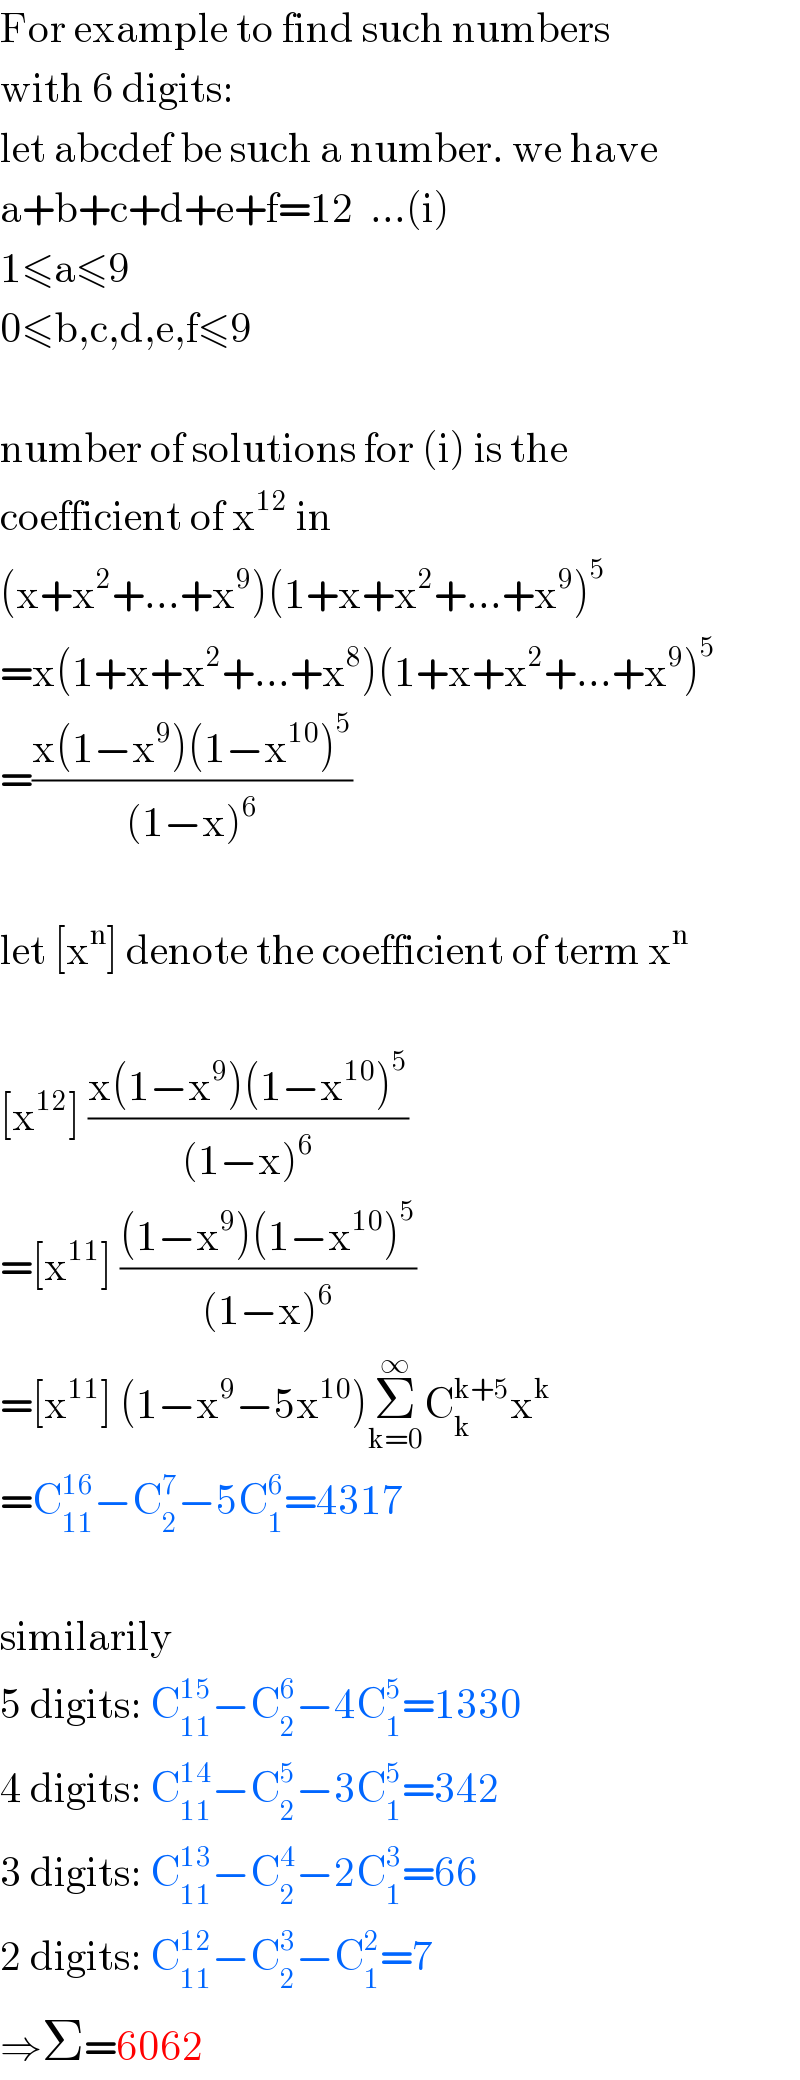 For example to find such numbers  with 6 digits:  let abcdef be such a number. we have  a+b+c+d+e+f=12  ...(i)  1≤a≤9  0≤b,c,d,e,f≤9    number of solutions for (i) is the  coefficient of x^(12)  in  (x+x^2 +...+x^9 )(1+x+x^2 +...+x^9 )^5   =x(1+x+x^2 +...+x^8 )(1+x+x^2 +...+x^9 )^5   =((x(1−x^9 )(1−x^(10) )^5 )/((1−x)^6 ))    let [x^n ] denote the coefficient of term x^n     [x^(12) ] ((x(1−x^9 )(1−x^(10) )^5 )/((1−x)^6 ))  =[x^(11) ] (((1−x^9 )(1−x^(10) )^5 )/((1−x)^6 ))  =[x^(11) ] (1−x^9 −5x^(10) )Σ_(k=0) ^∞ C_k ^(k+5) x^k   =C_(11) ^(16) −C_2 ^7 −5C_1 ^6 =4317    similarily  5 digits: C_(11) ^(15) −C_2 ^6 −4C_1 ^5 =1330  4 digits: C_(11) ^(14) −C_2 ^5 −3C_1 ^5 =342  3 digits: C_(11) ^(13) −C_2 ^4 −2C_1 ^3 =66  2 digits: C_(11) ^(12) −C_2 ^3 −C_1 ^2 =7  ⇒Σ=6062  